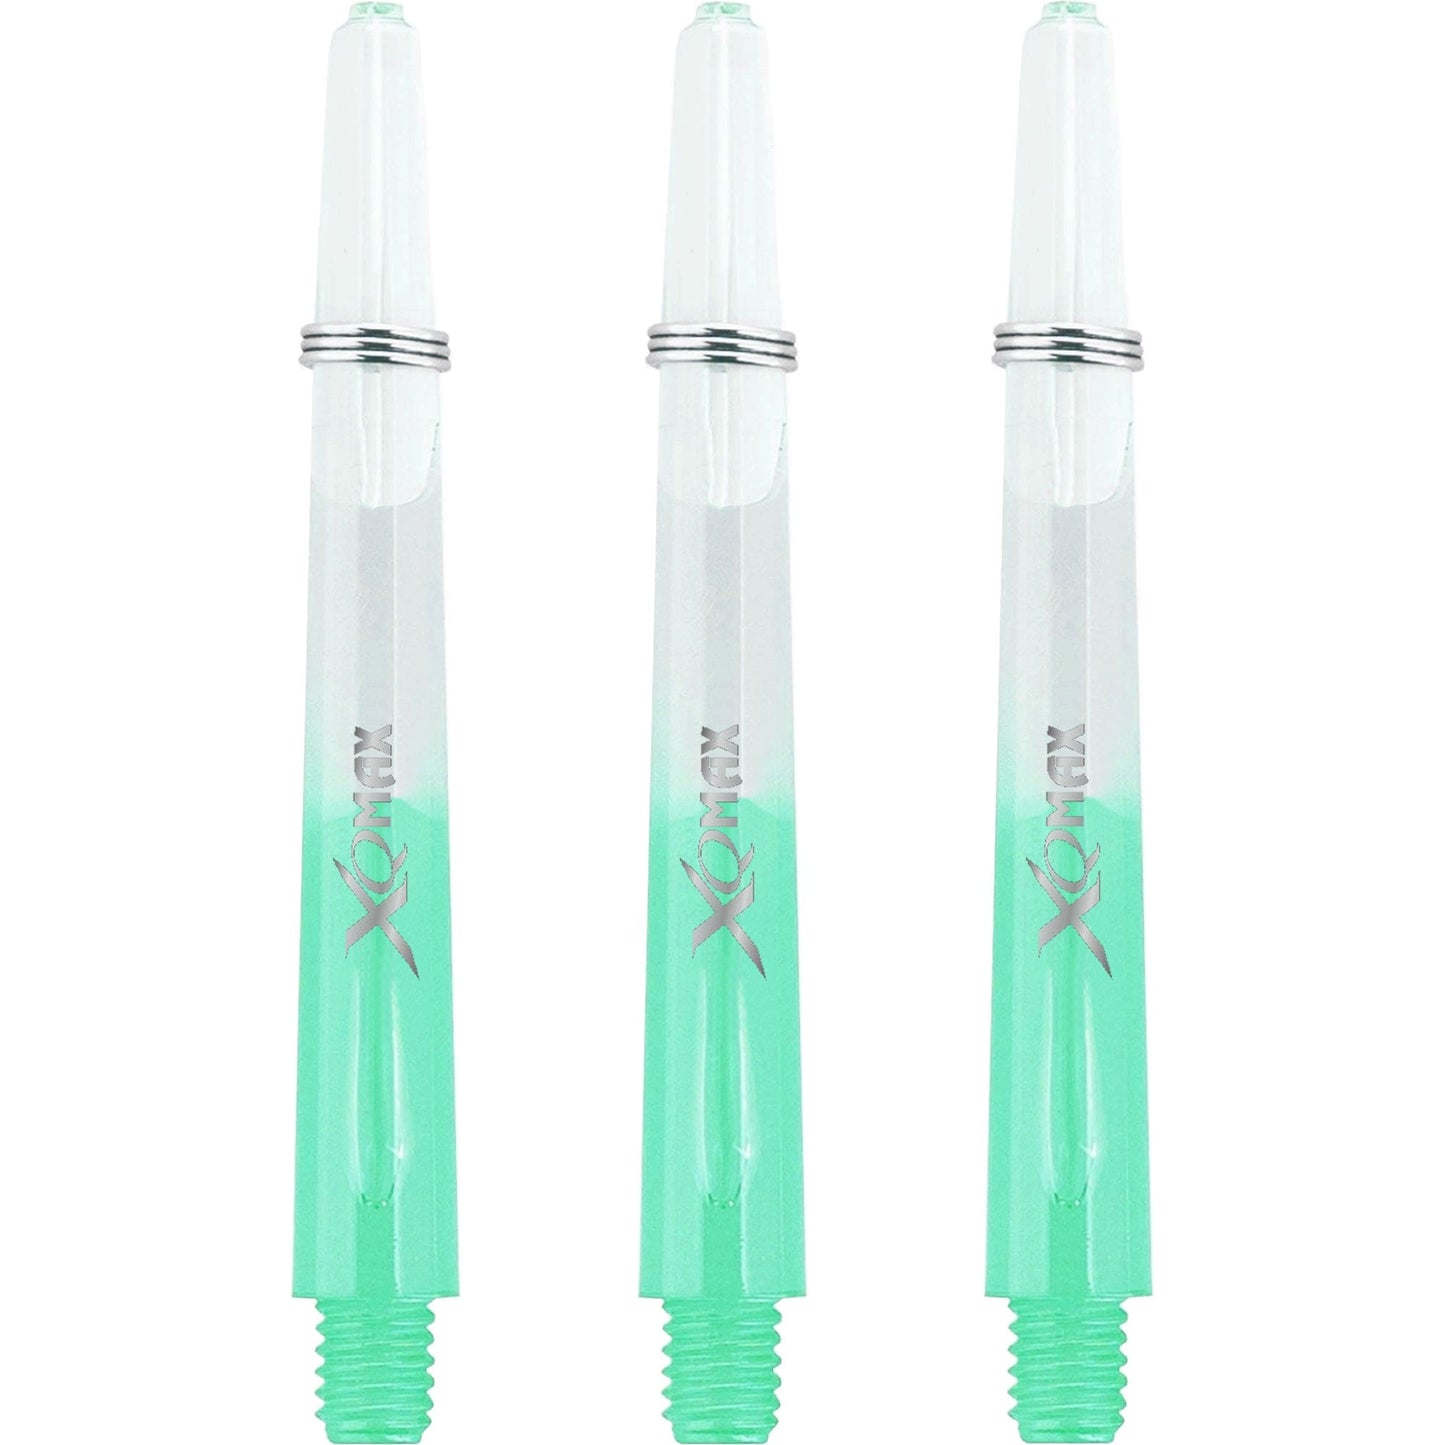 XQMax Gradient Polycarbonate Dart Shafts - with Logo - includes Springs - Transparent & Green Medium